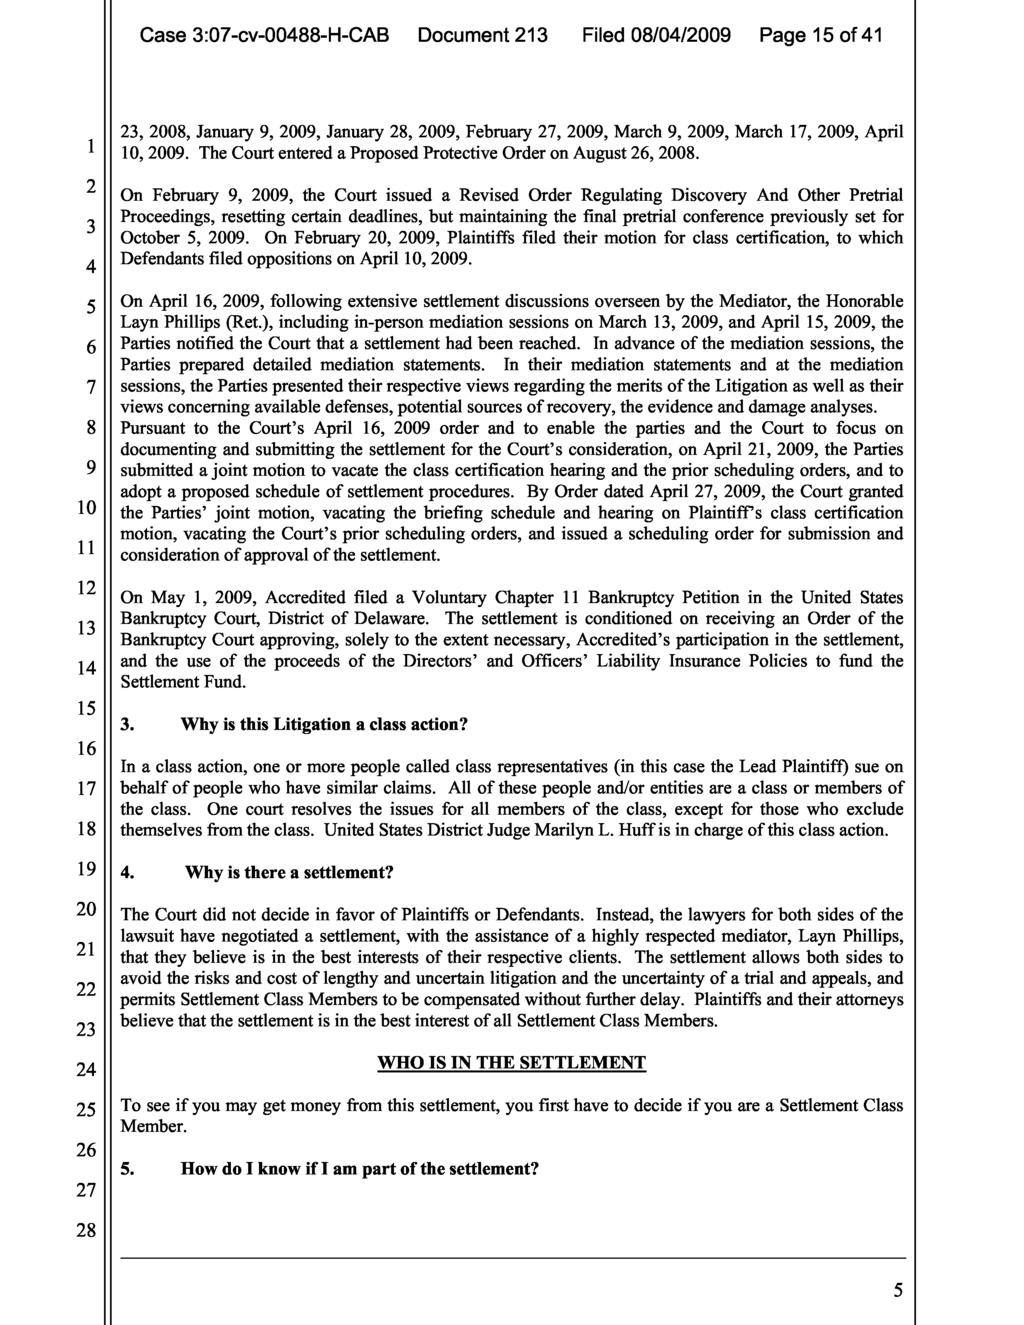 Case 3:07-cv-0088-H-CAB Document 213 Filed 08/0/2009 Page 15 of 1 23, 2008, January 9, 2009, January, 2009, February 27, 2009, March 9, 2009, March 17, 2009, April 1 10, 2009.